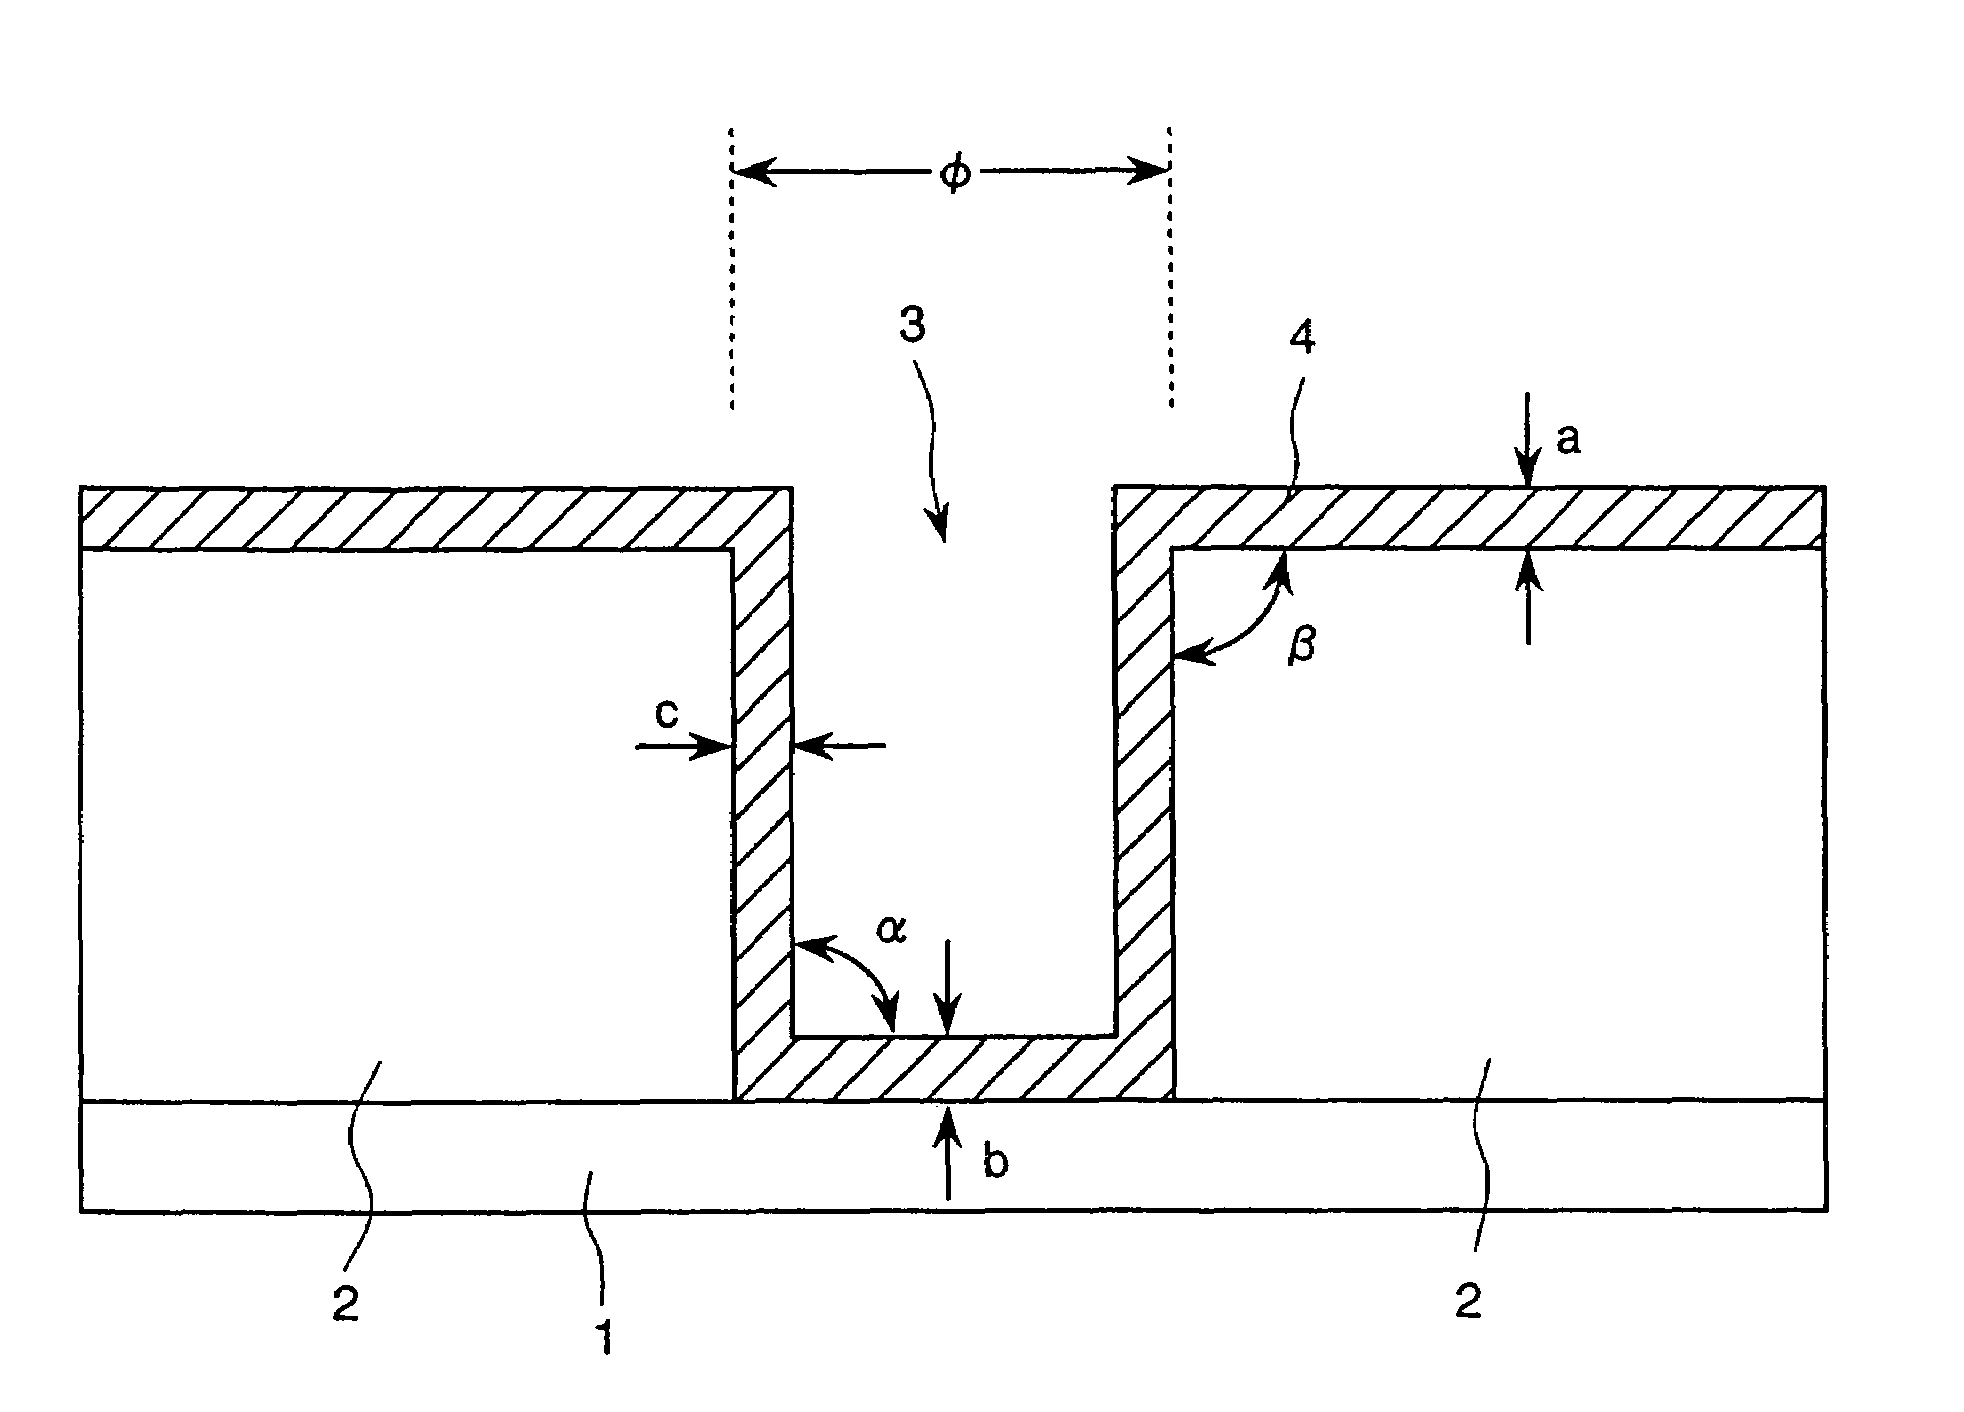 Method of manufacturing a wiring substrate and an electroless copper plating solution for providing interlayer connections